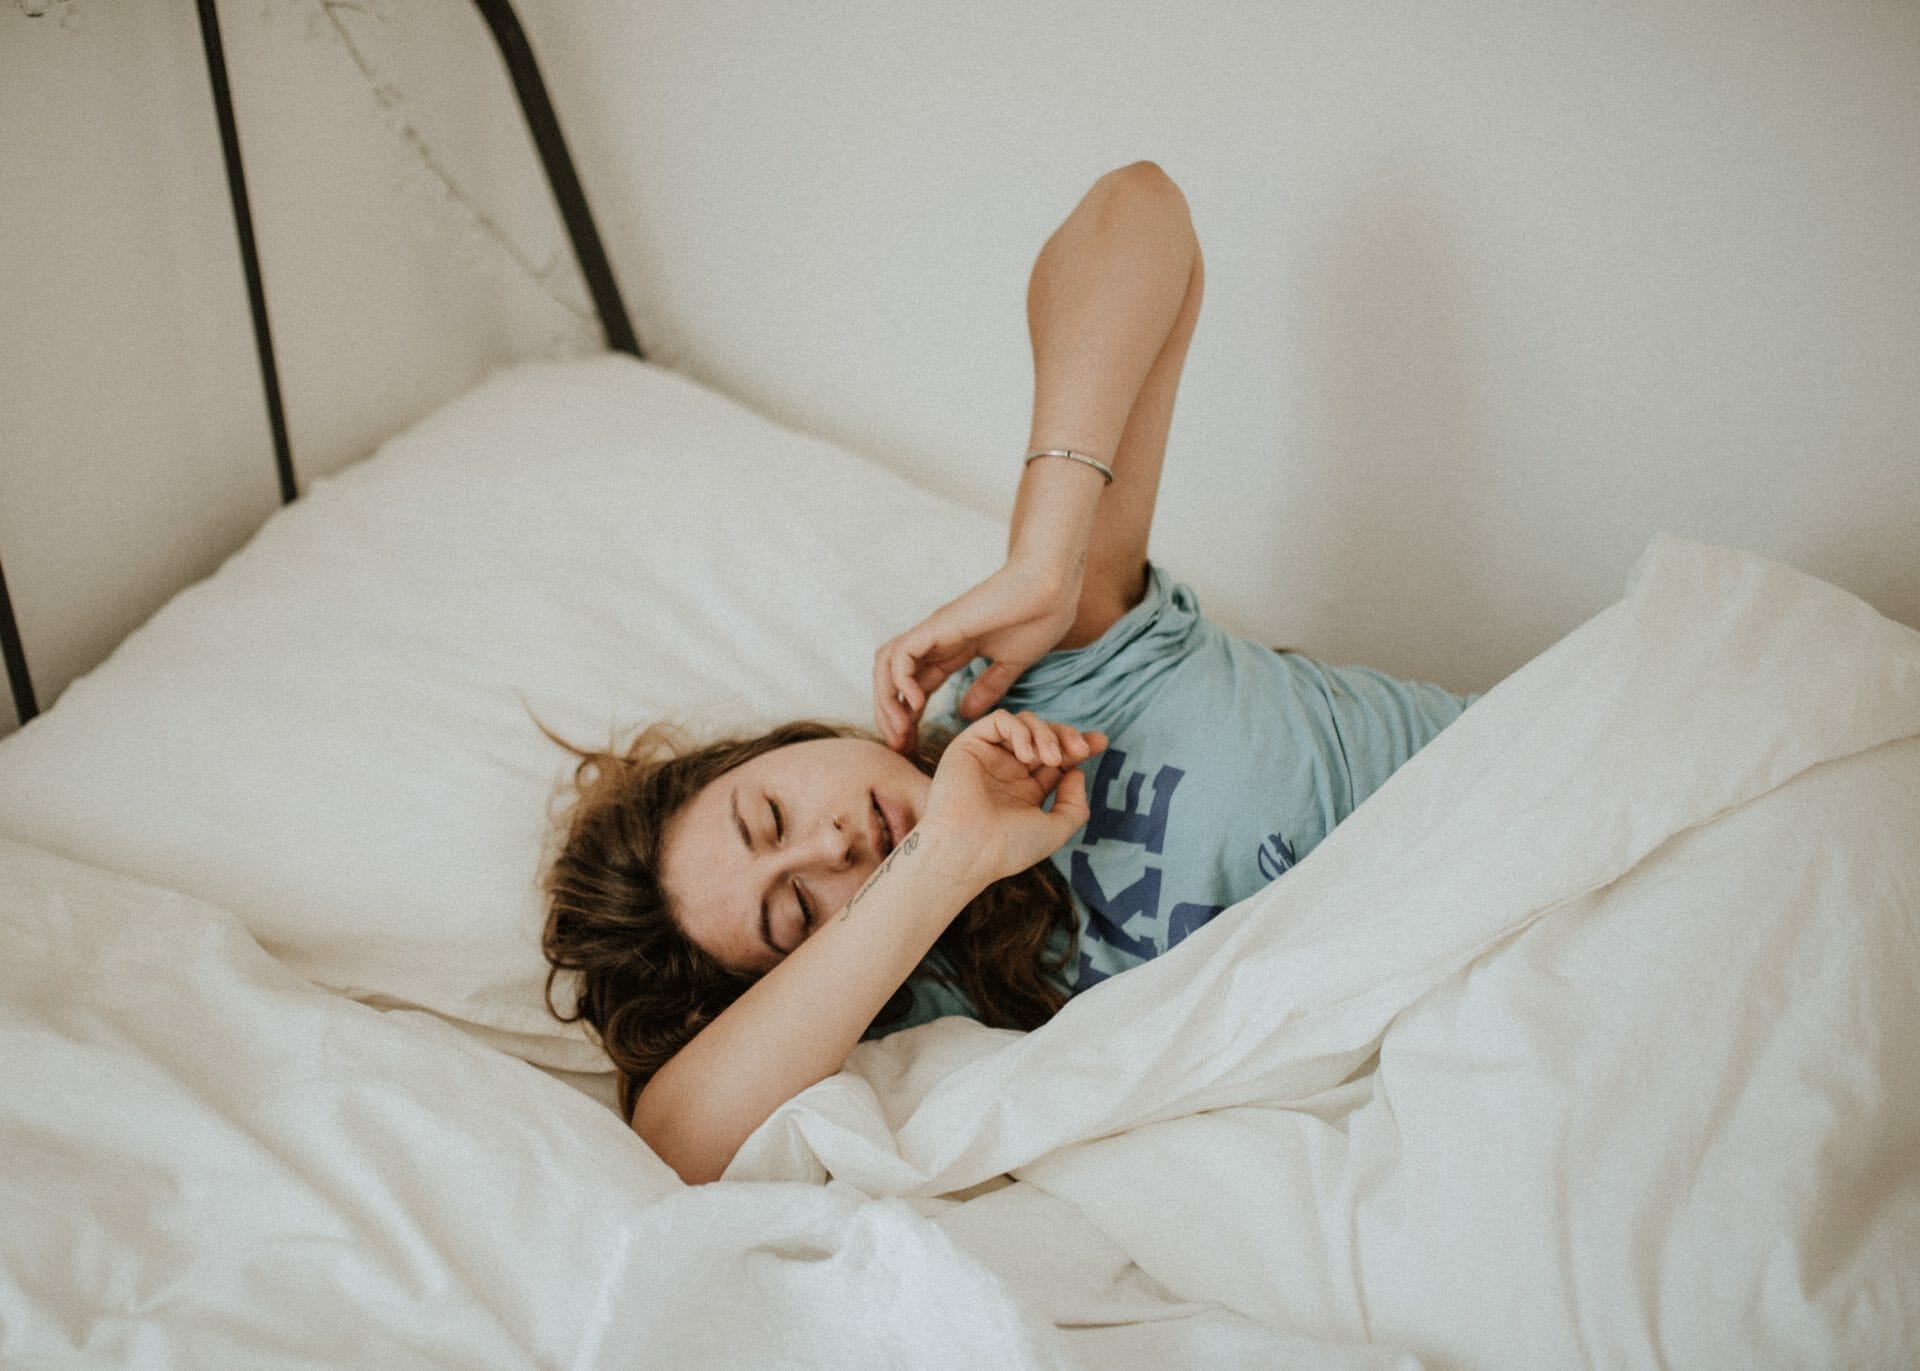 What is the Healthiest Sleeping Position for the Best Sleep?